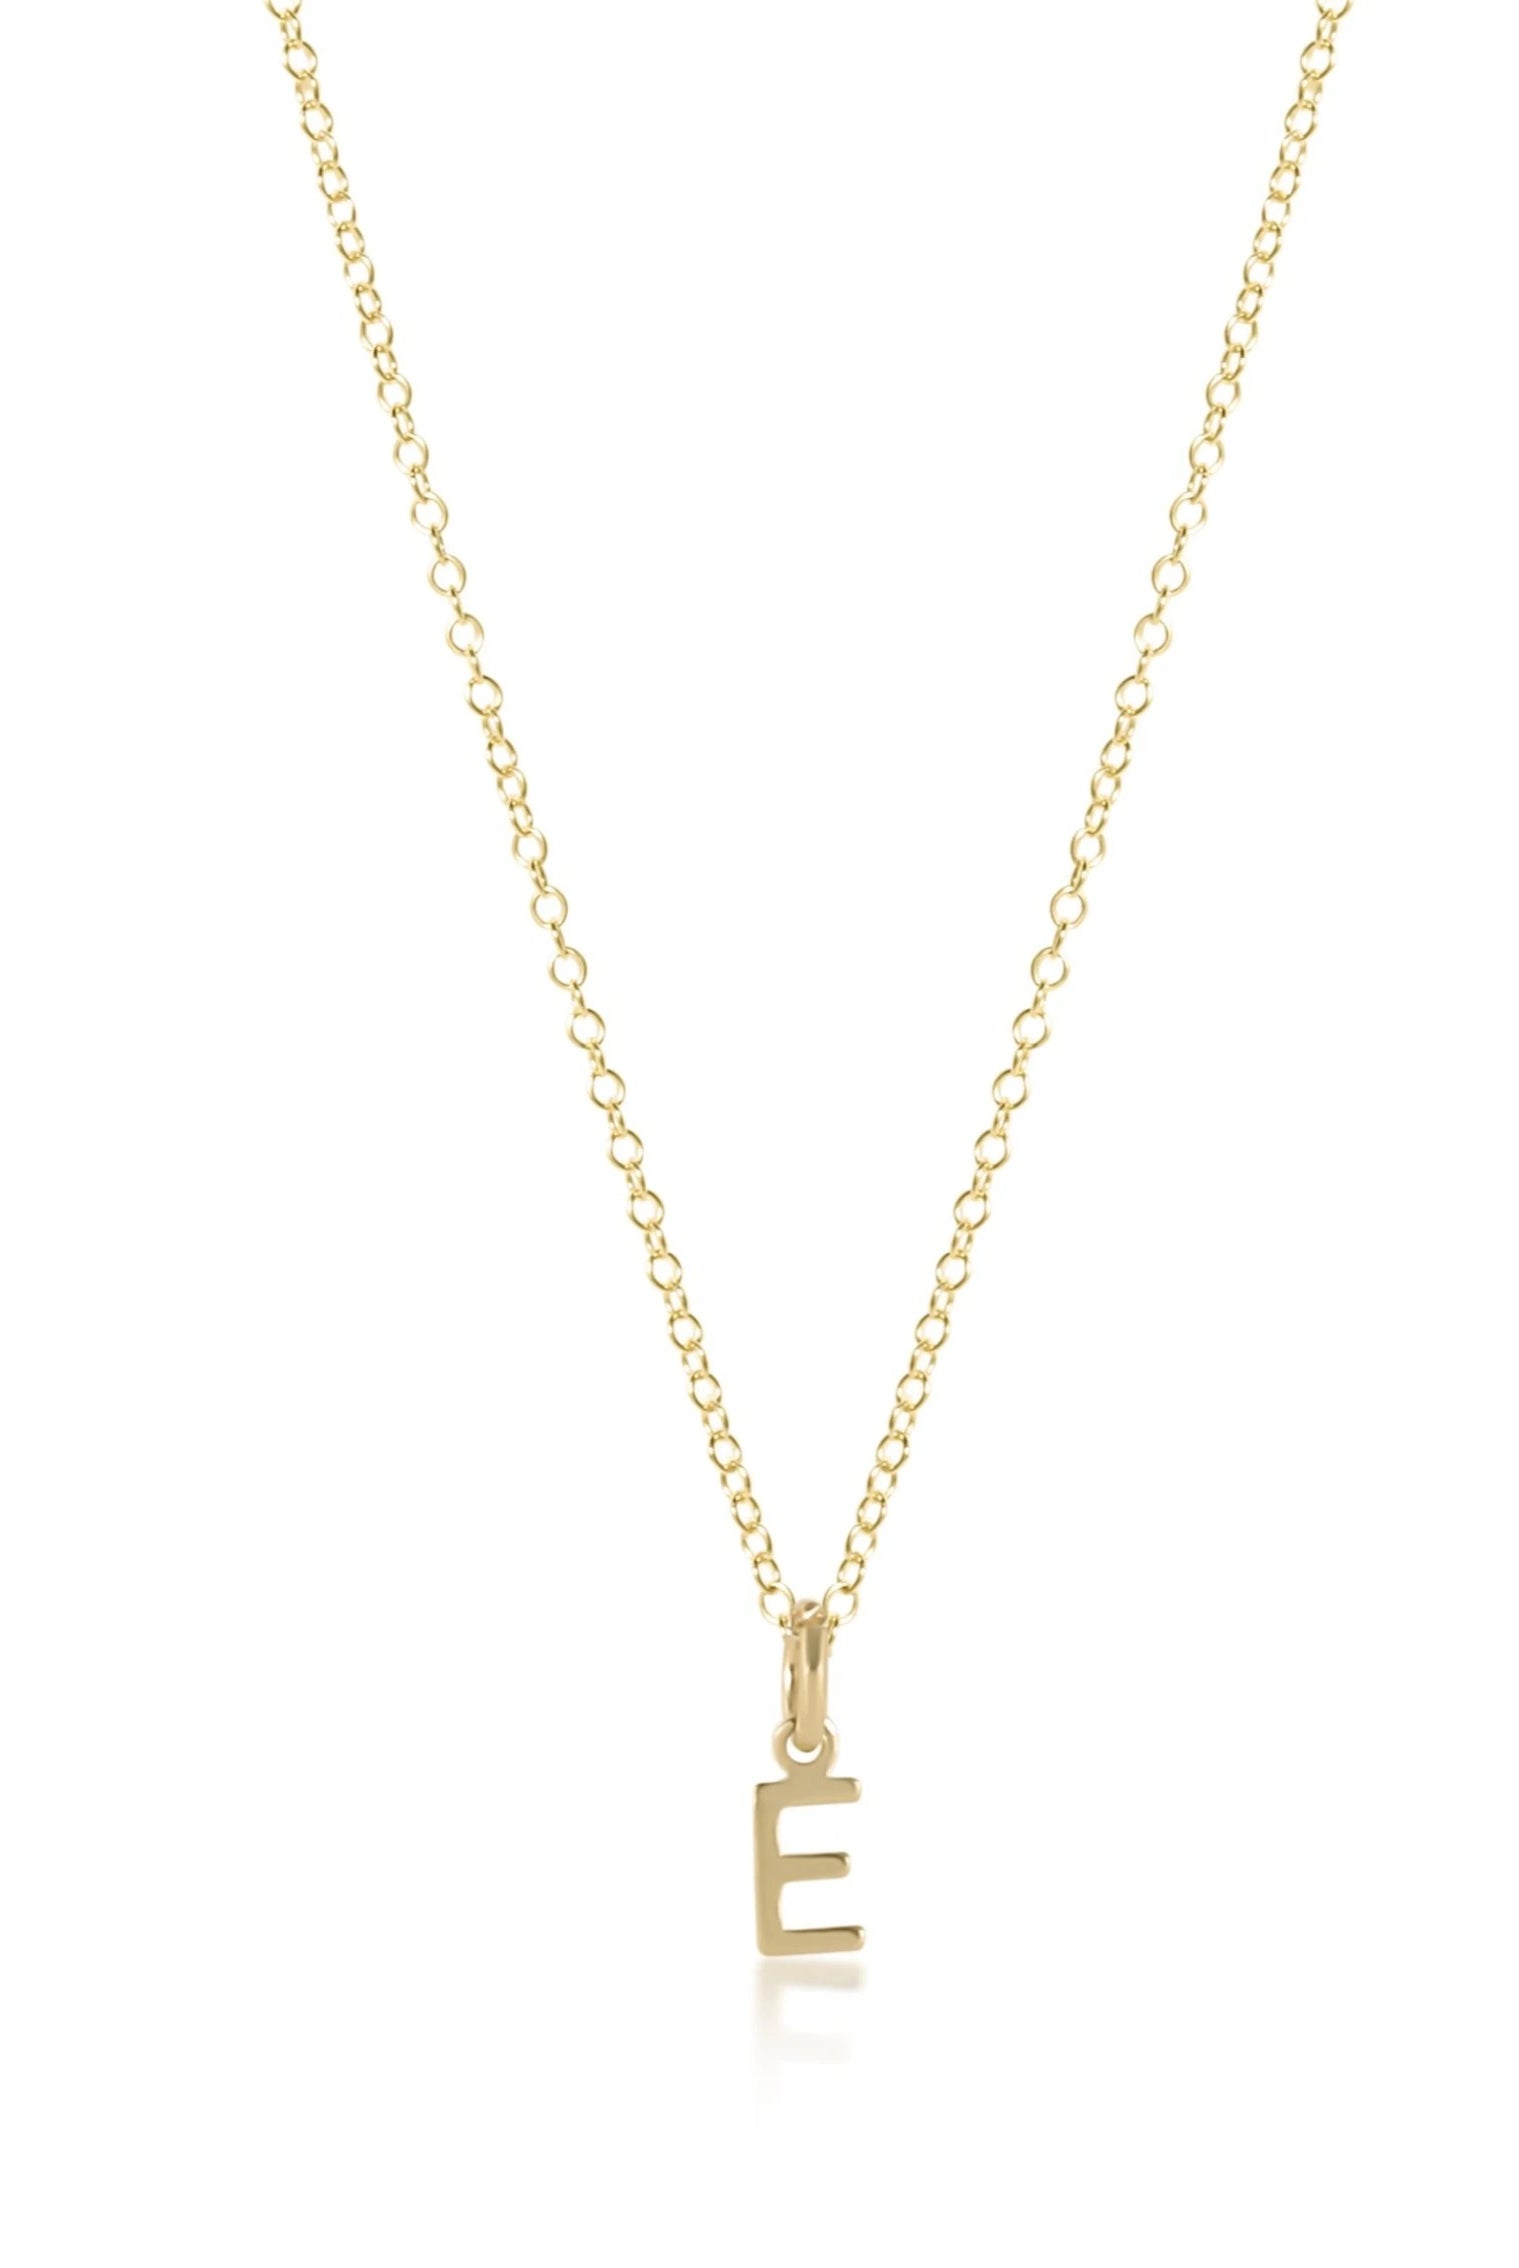 Respect Gold Charm Necklace 16”-Necklaces-eNewton-The Lovely Closet, Women's Fashion Boutique in Alexandria, KY